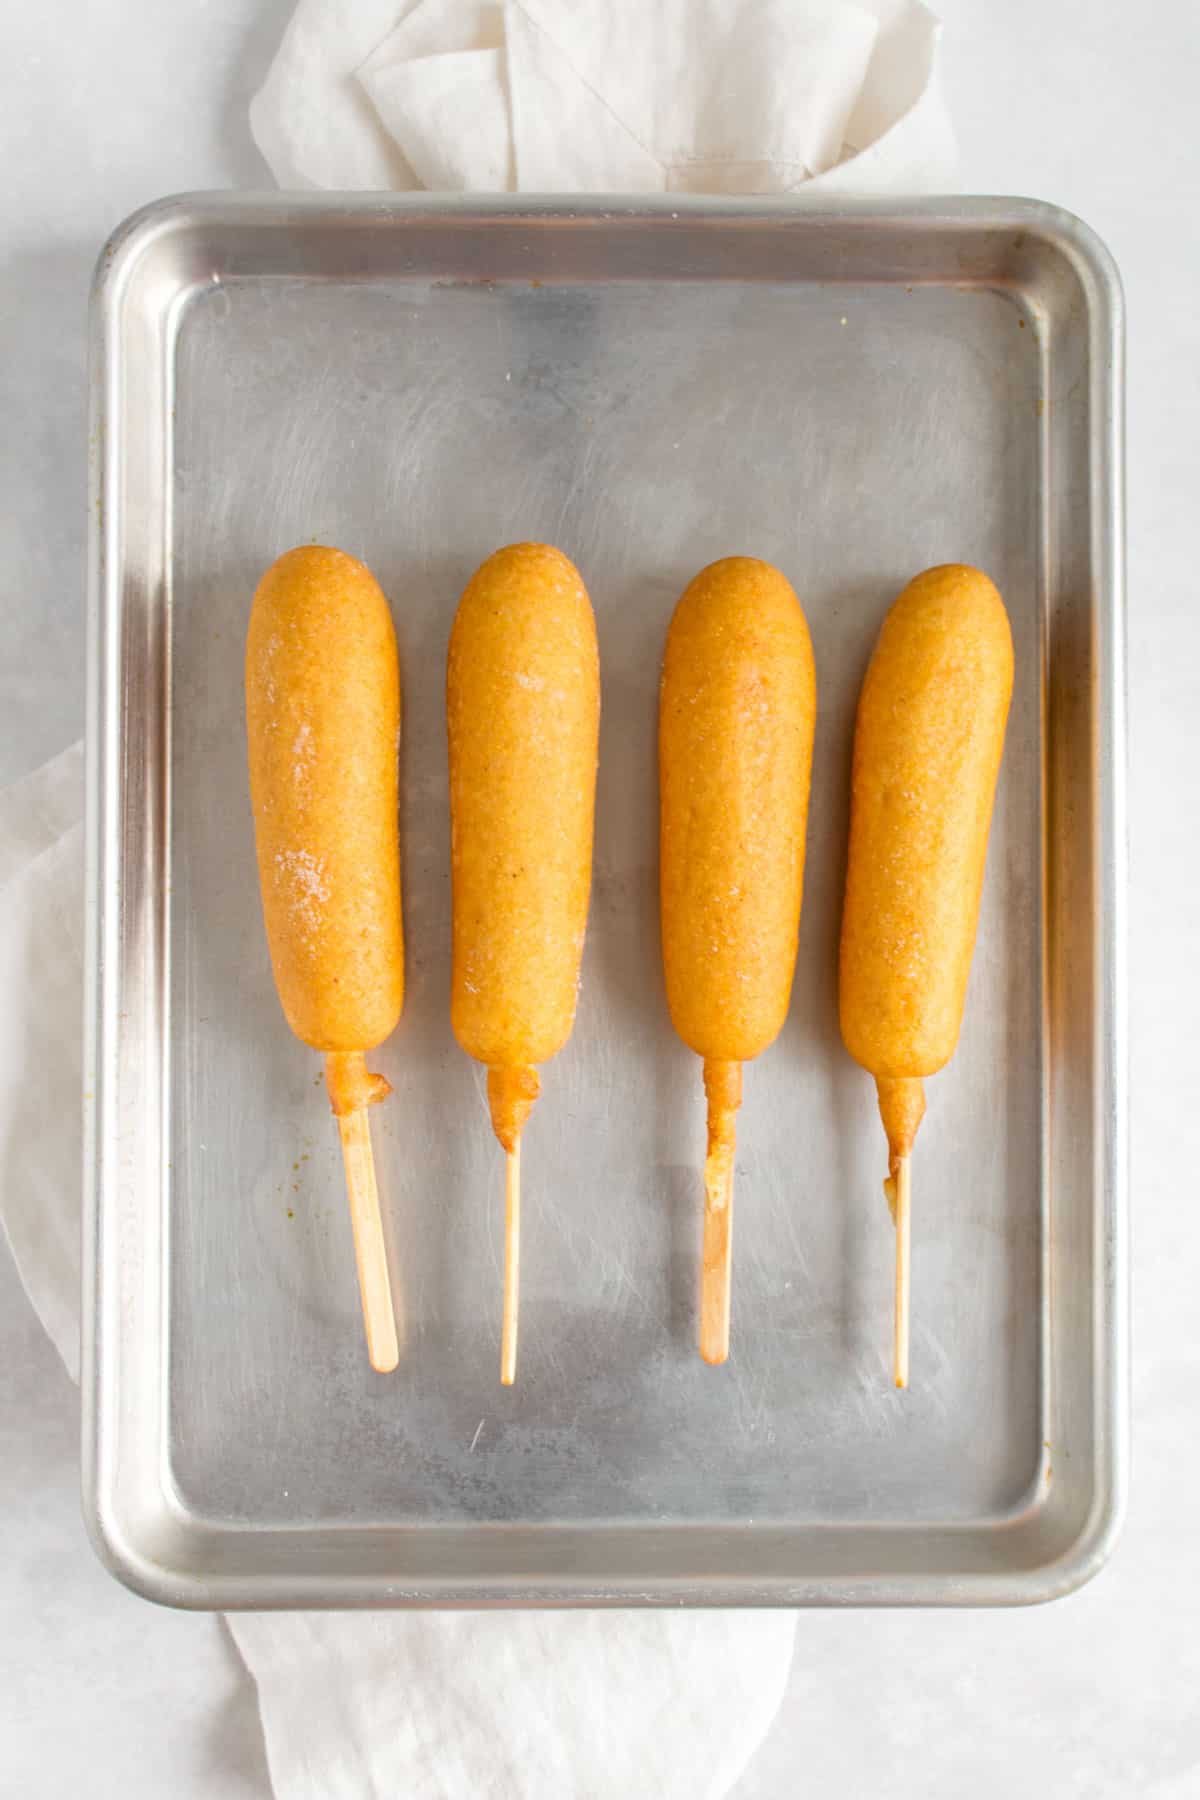 Frozen corn dogs on a sheet pan, uncooked.